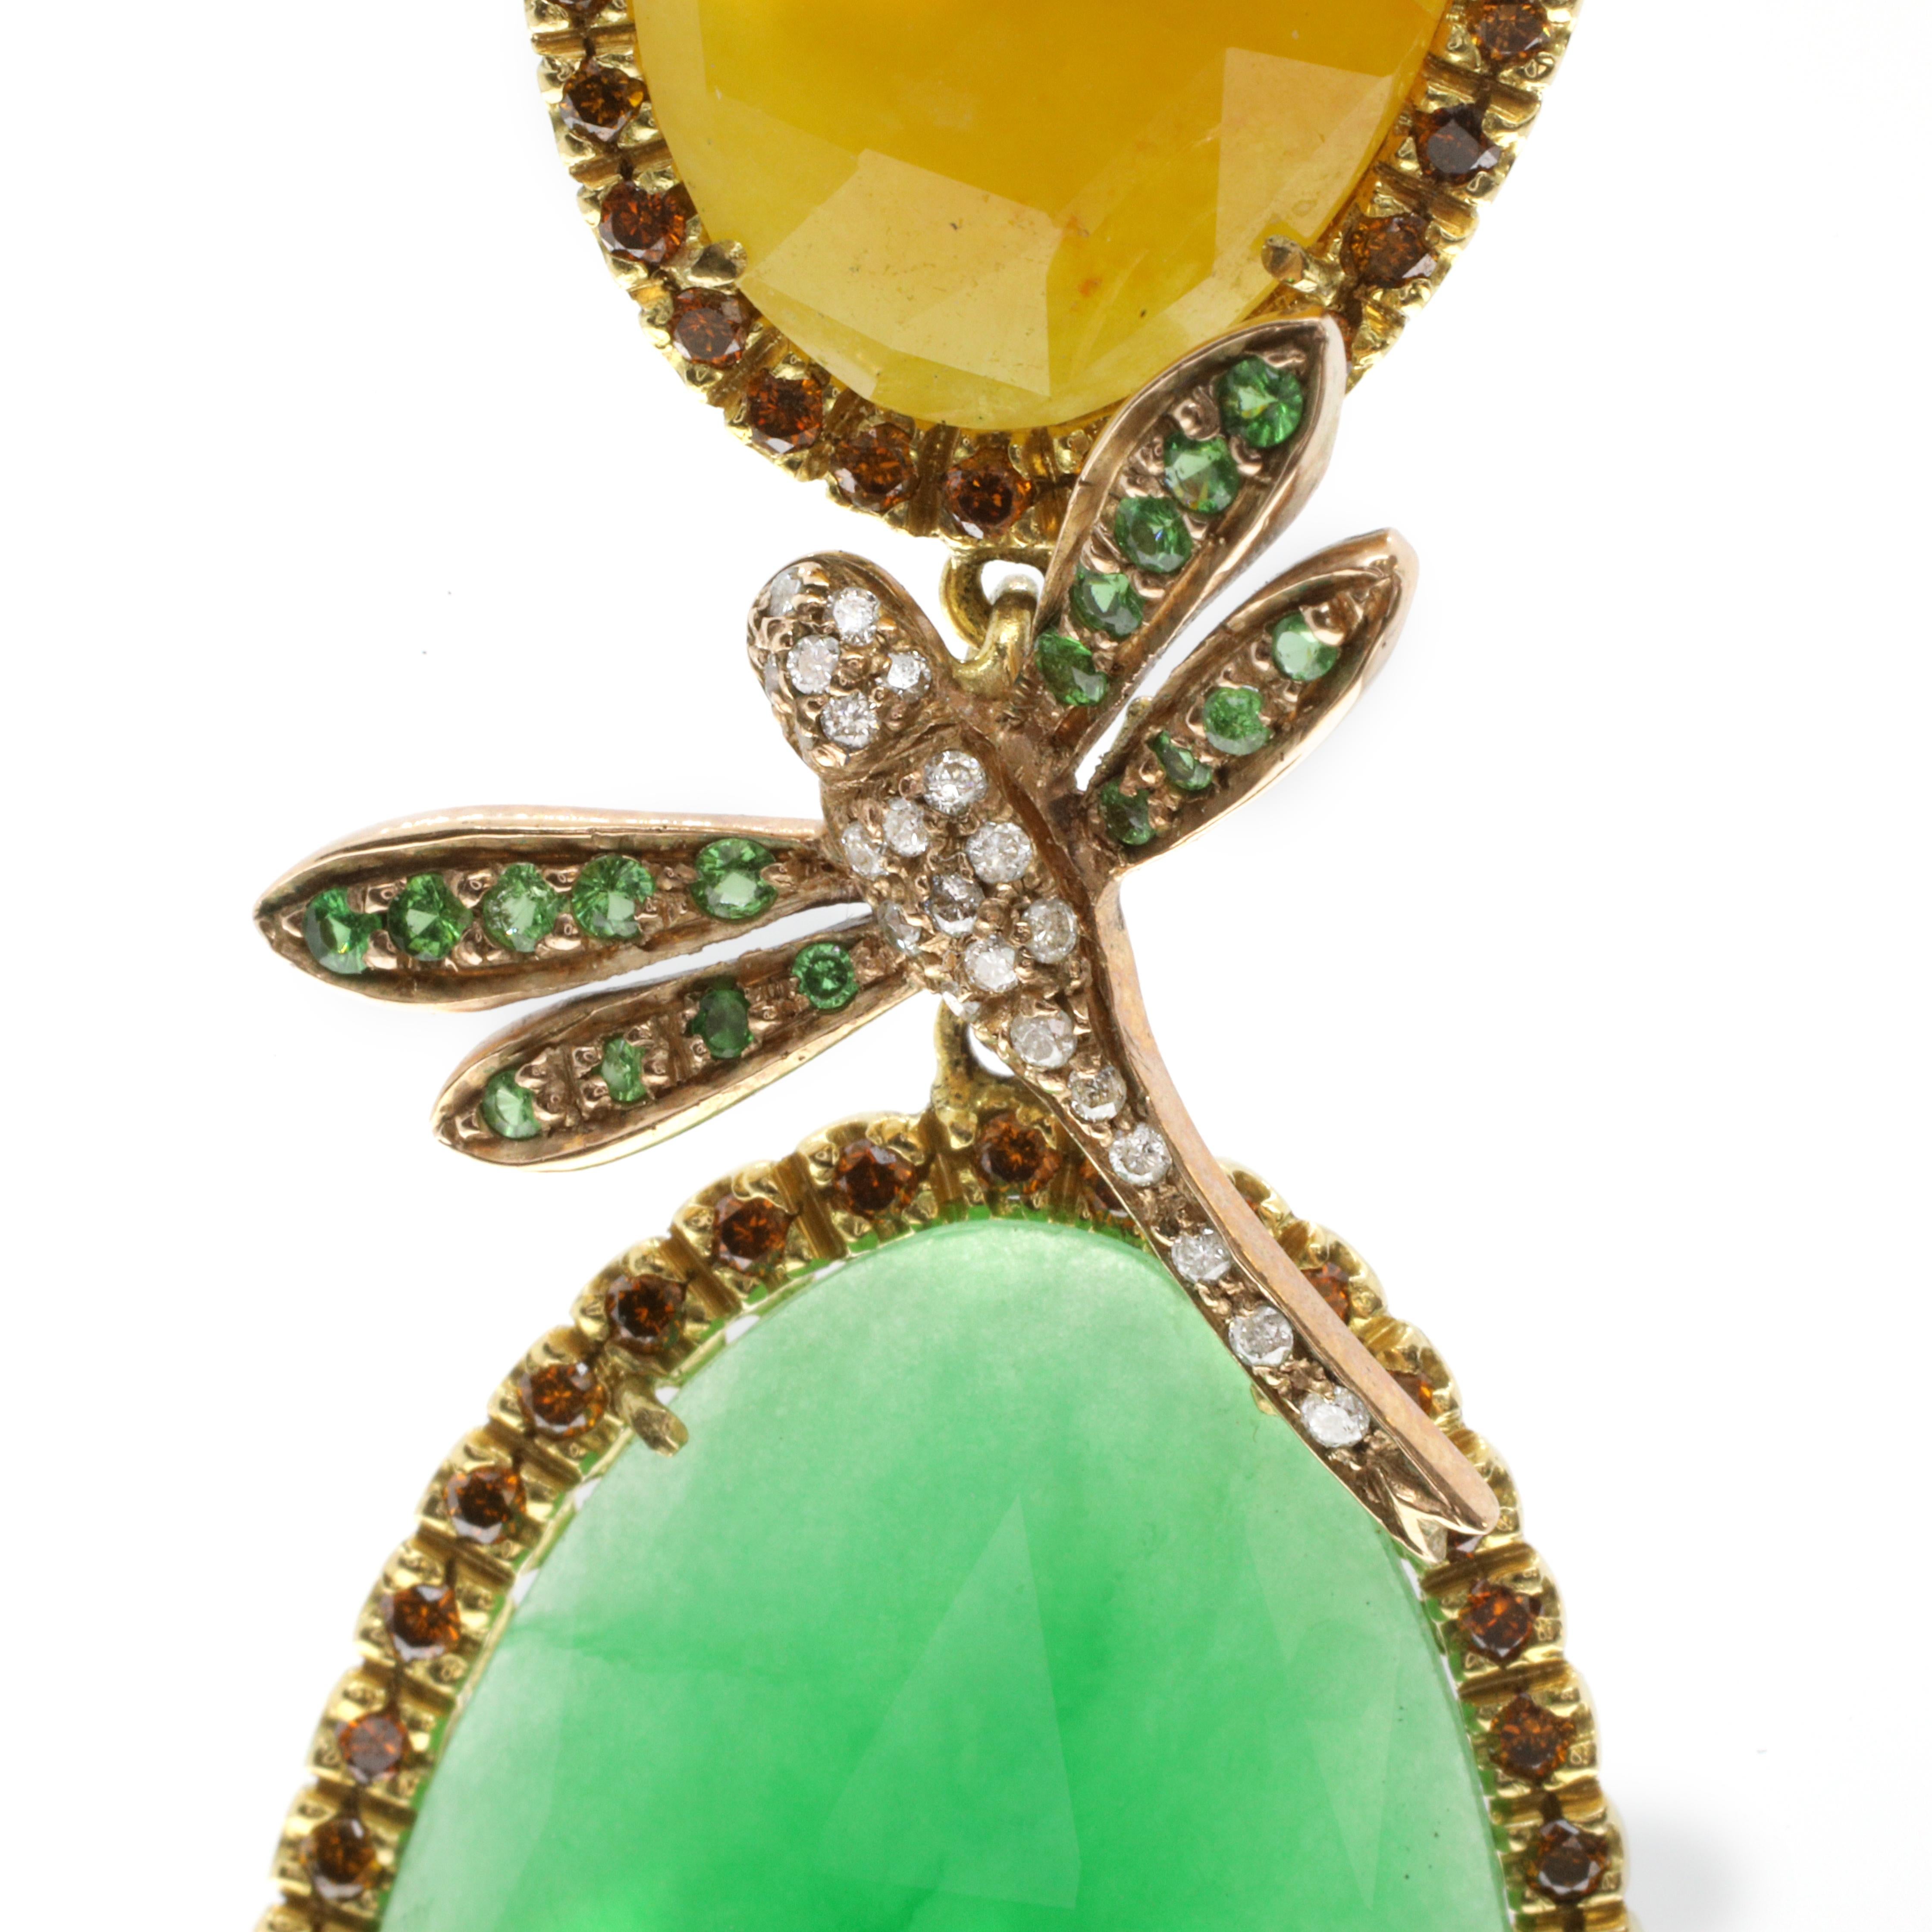 These spectacular 18-karat yellow gold drop earrings feature vibrant jade stones framed by a single row of cognac-coloured brown diamonds. Between the two jade stones, a dragonfly just alighted, is set with brilliant tsavorites and white diamonds.